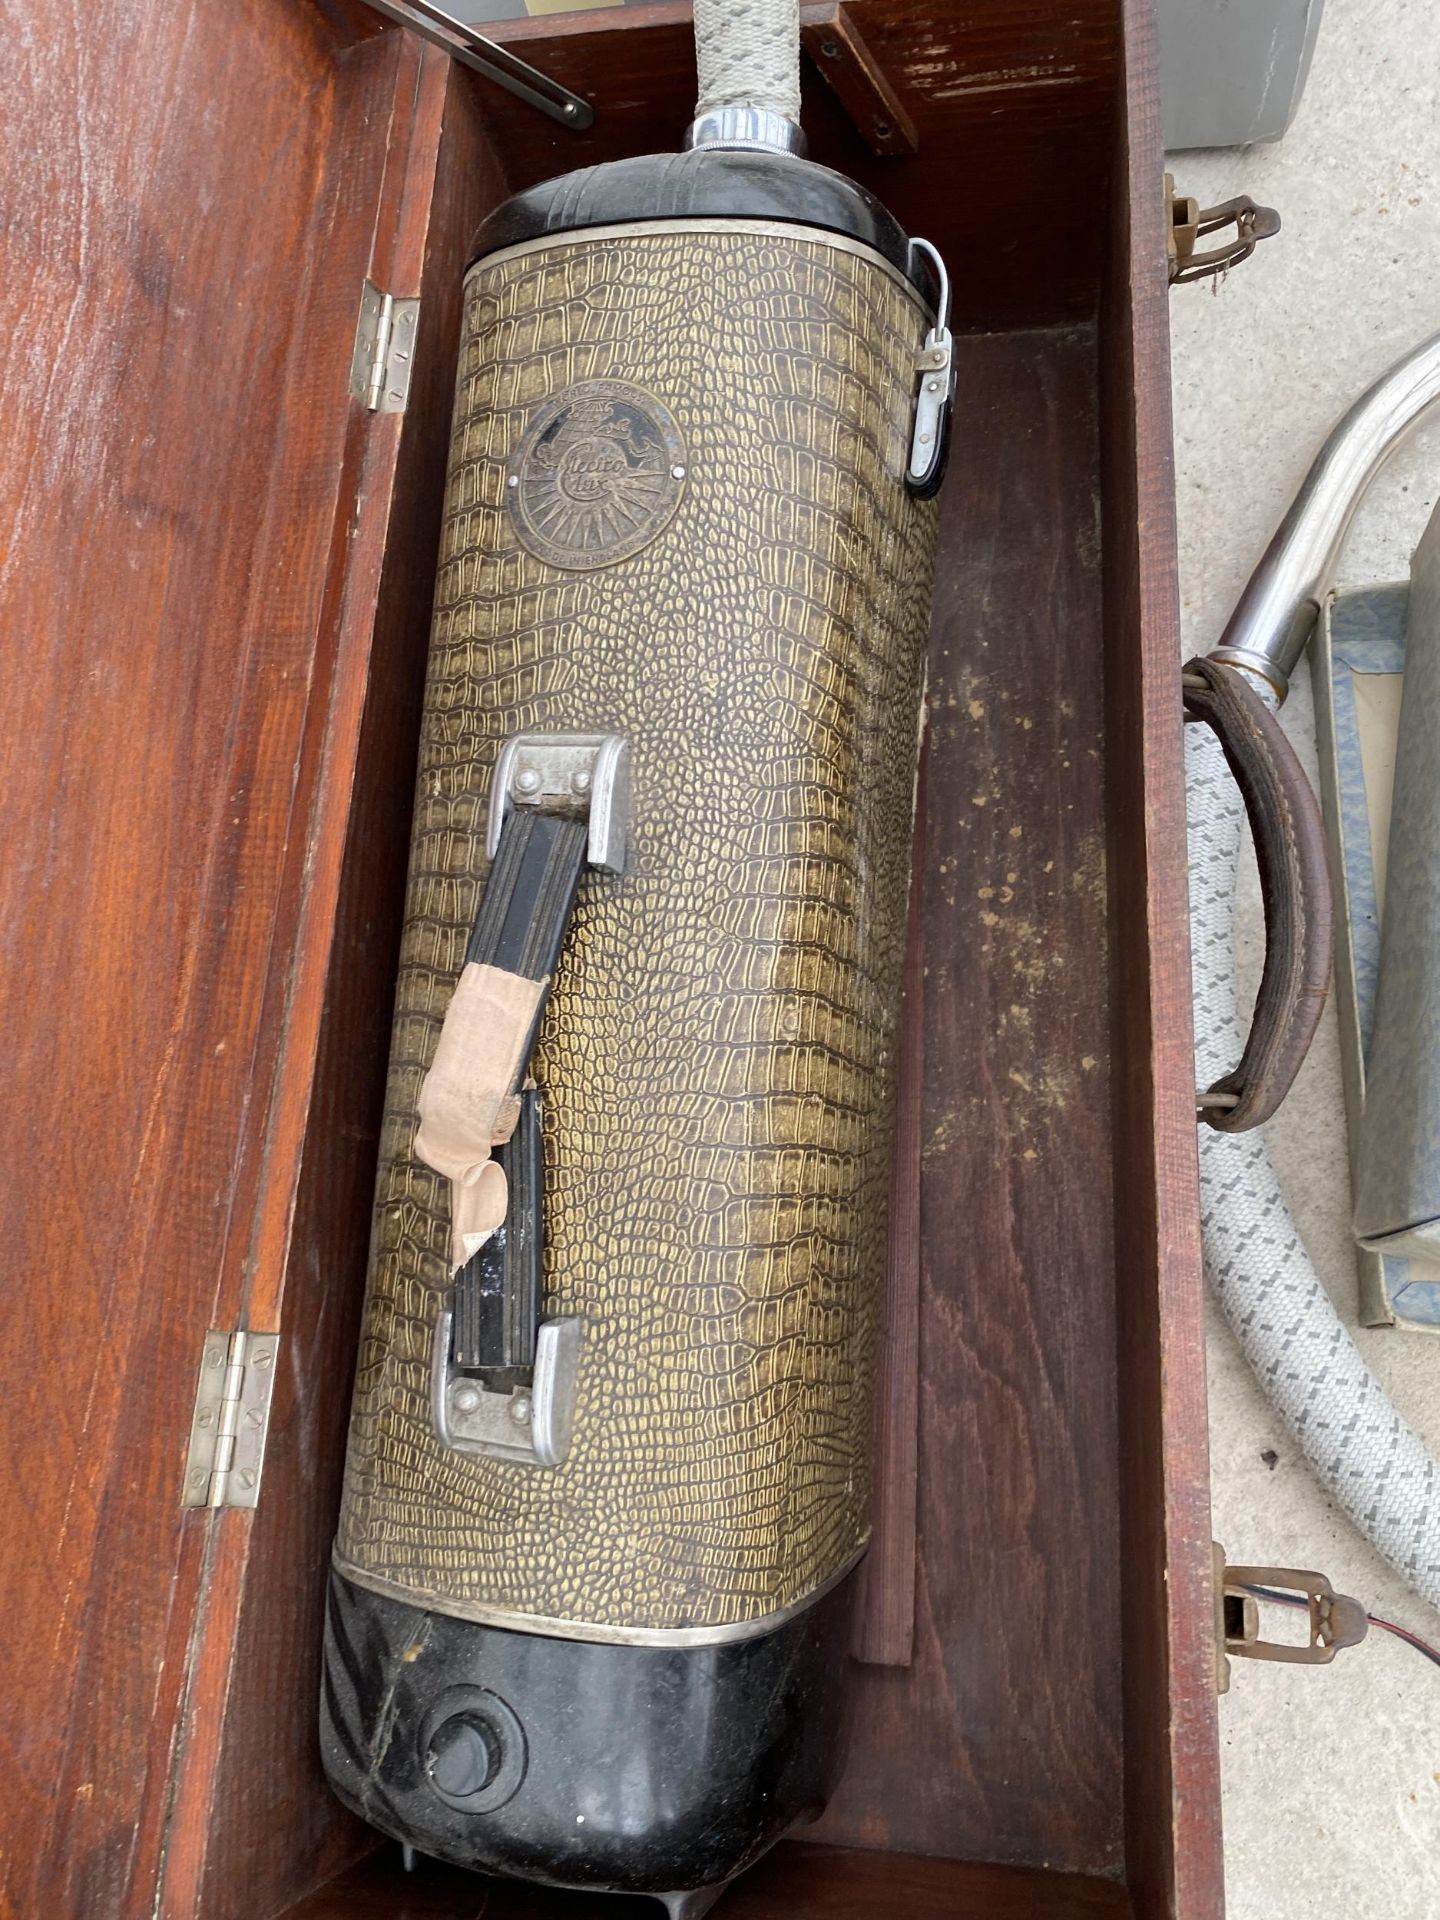 A VINTAGE/RETRO ELECTROLUX VACUUM CLEANER - Image 3 of 4